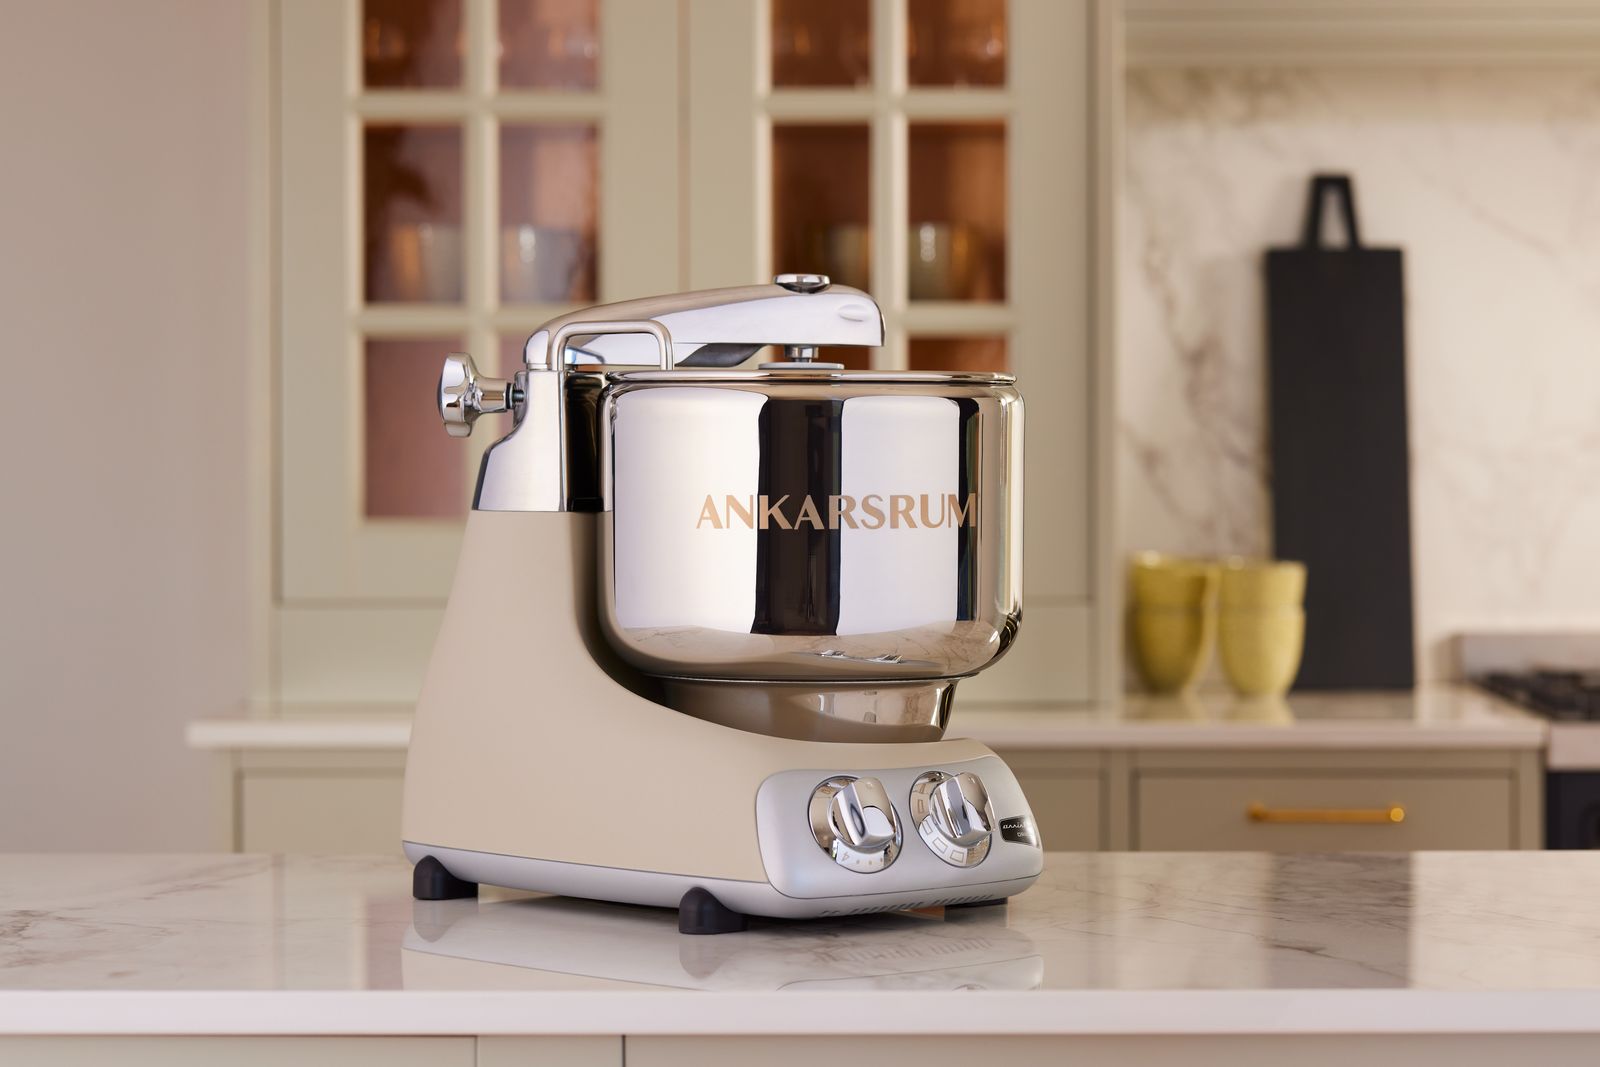 Stand Mixers Archives - Kitchenware News & Housewares ReviewKitchenware News & Review